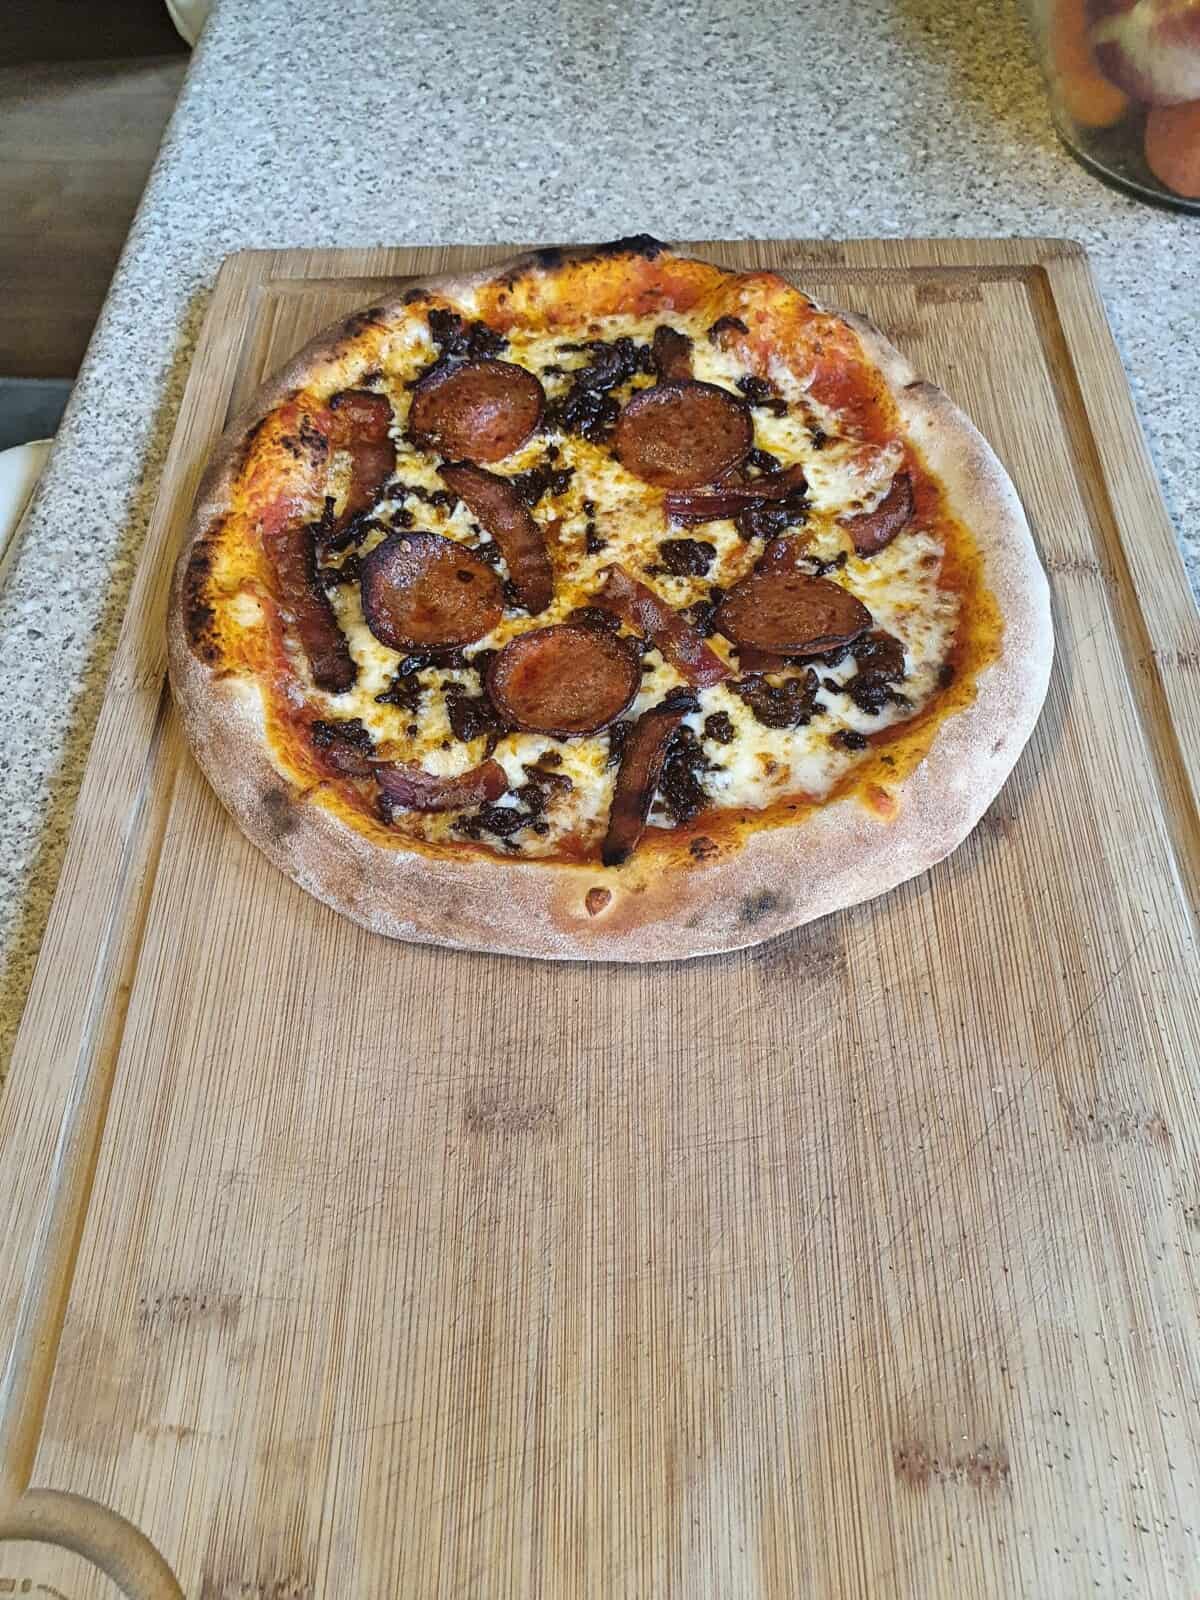 A pizza made on the Ooni Karu 12 pizza oven.